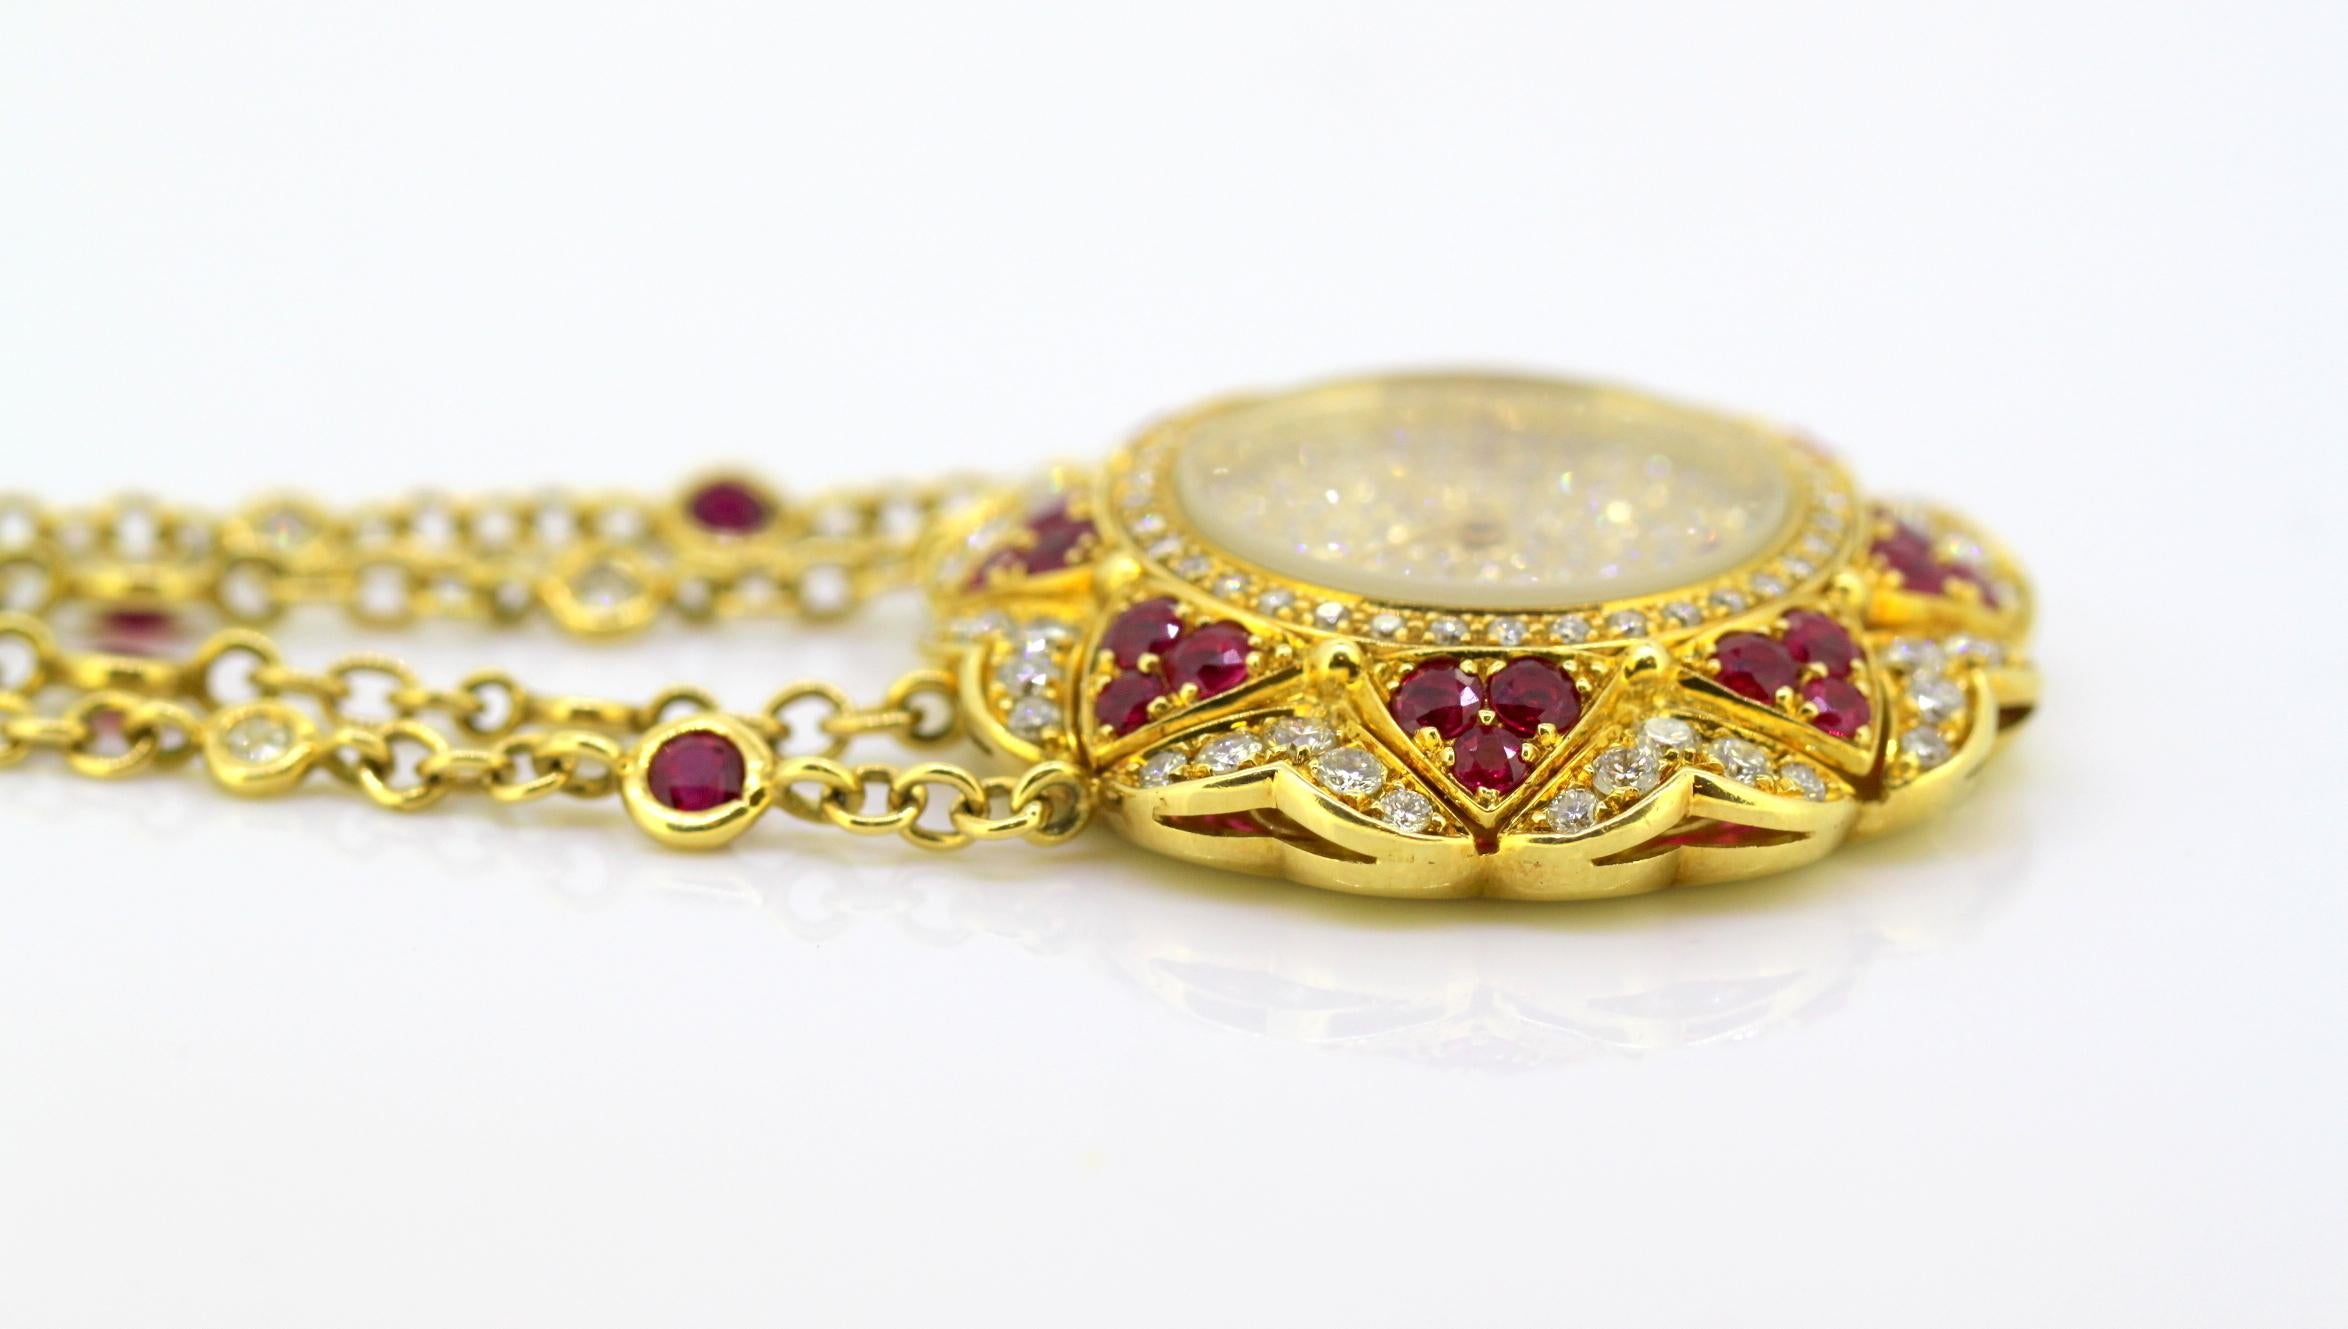 Moussaieff 18 Karat Gold Ladies Necklace Pendant Watch with Diamonds and Rubies 10